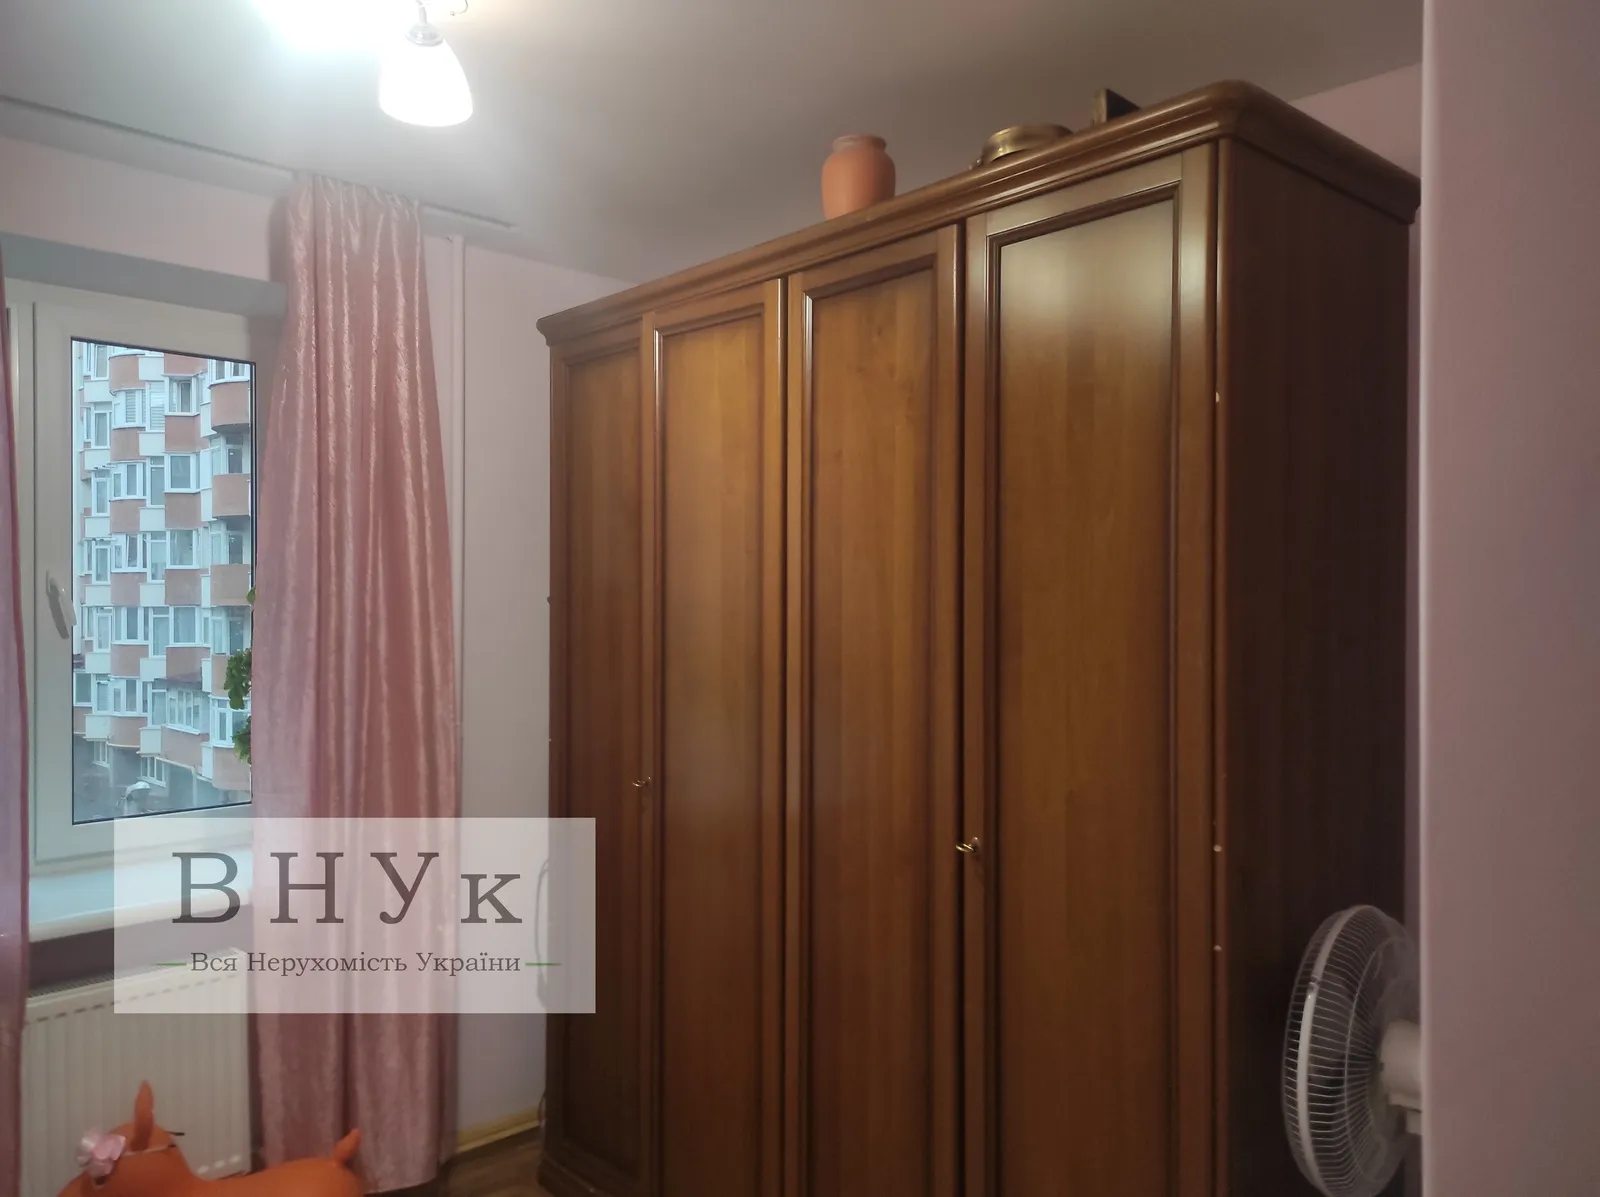 Apartments for sale. 3 rooms, 65 m², 4th floor/9 floors. Smakuly vul., Ternopil. 